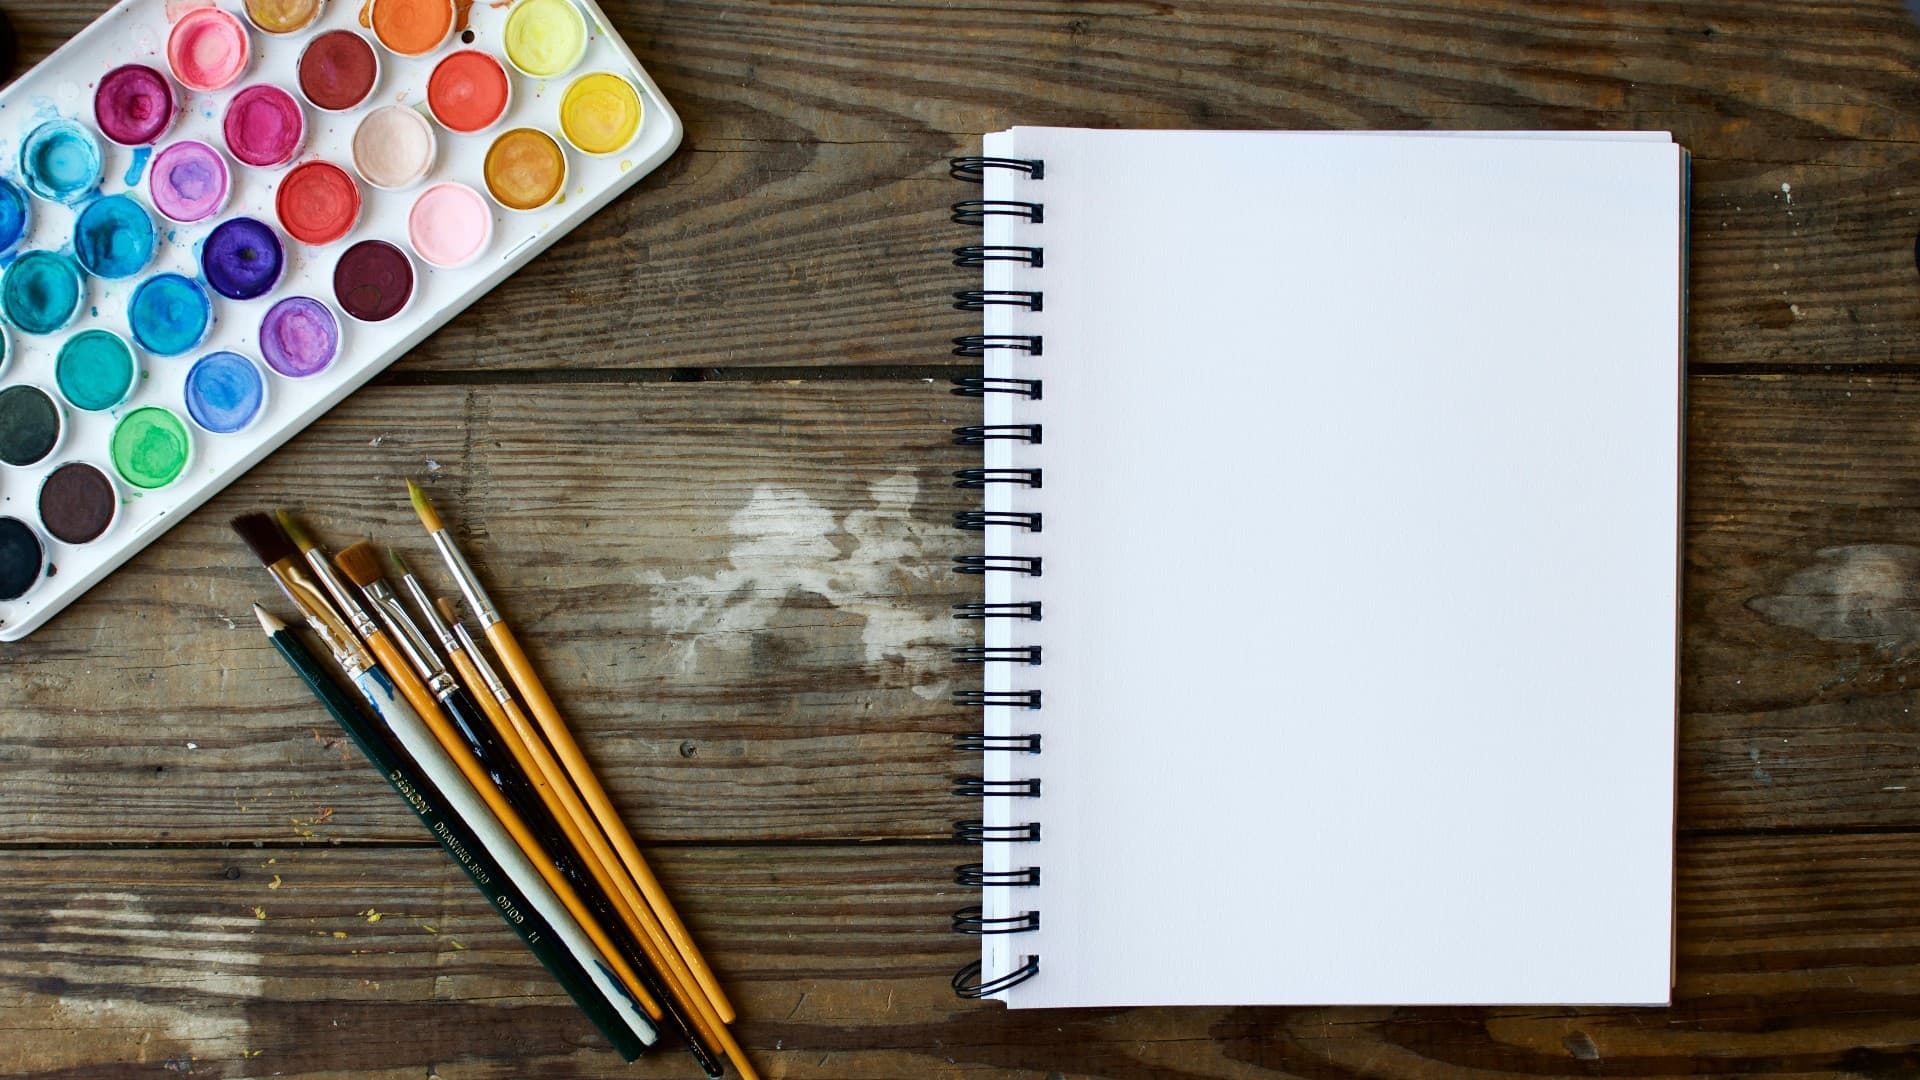 A generic image of watercolours, paint brushes and a notepad on a wooden table. Photo: Unsplash